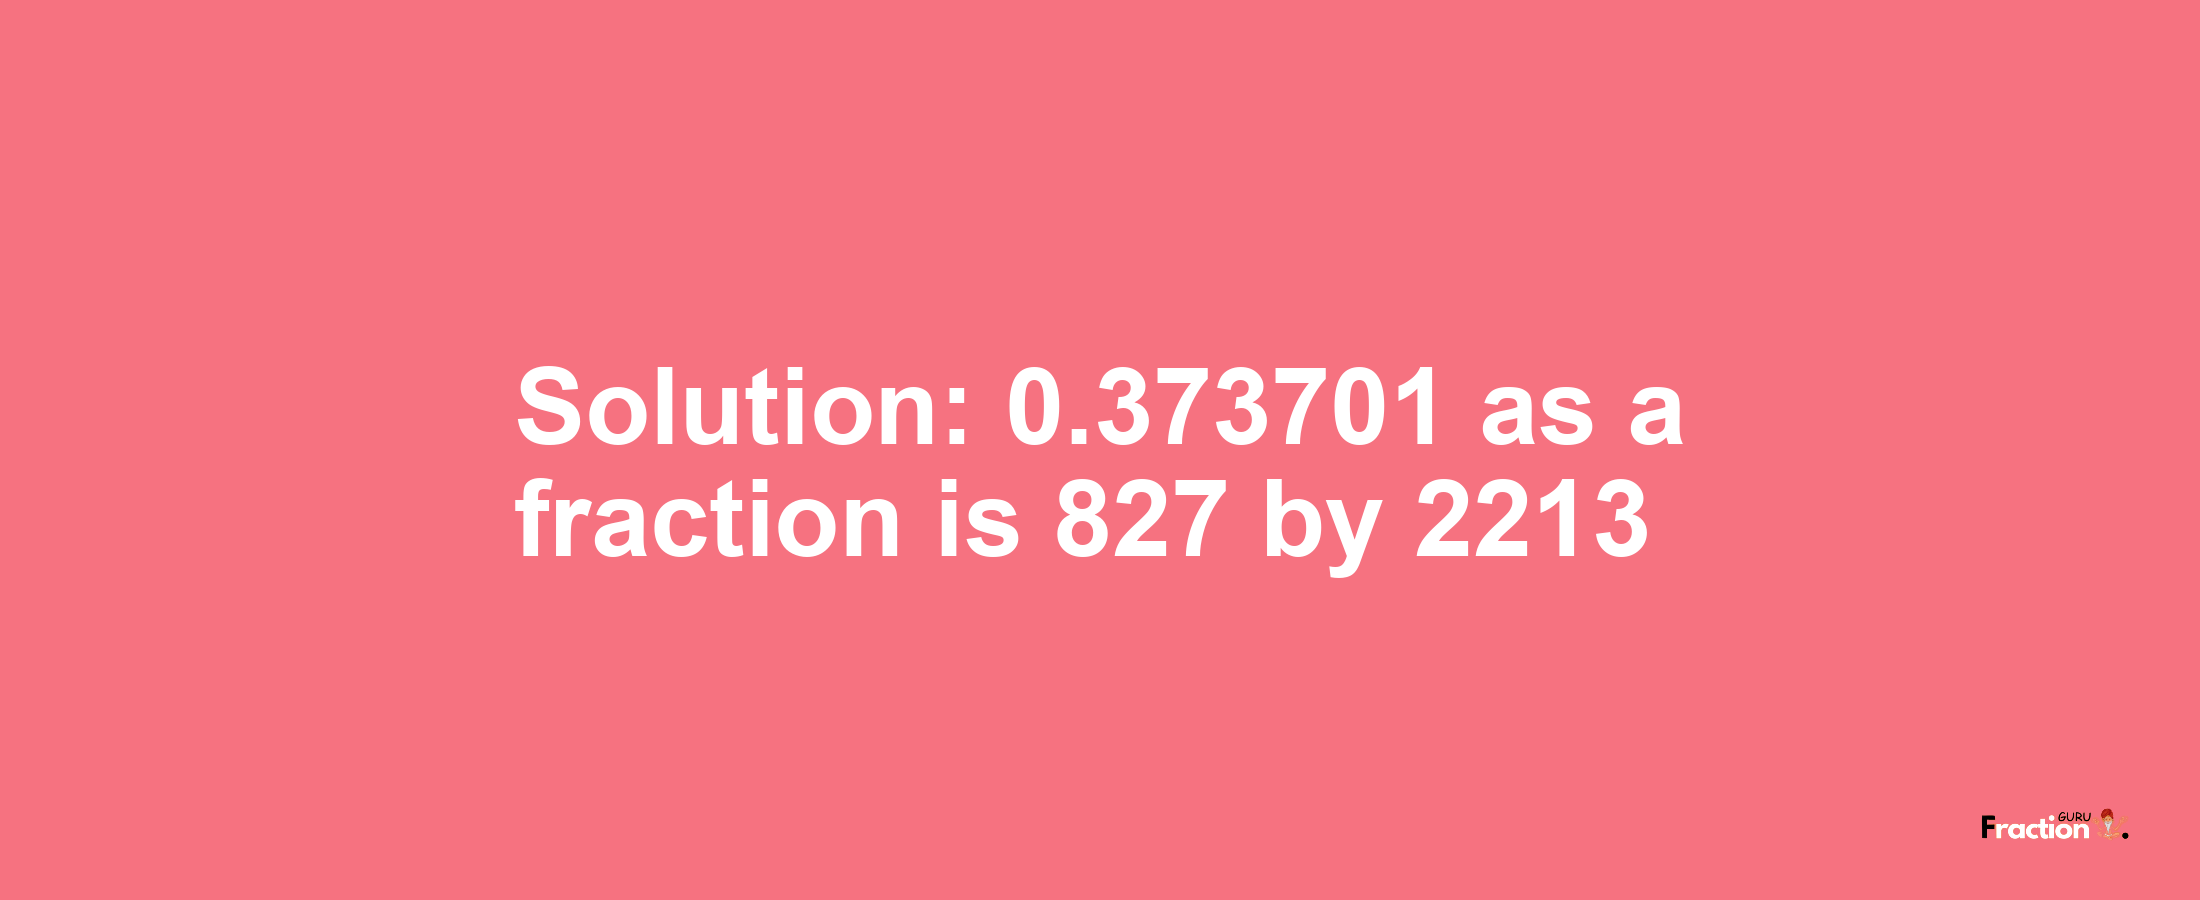 Solution:0.373701 as a fraction is 827/2213